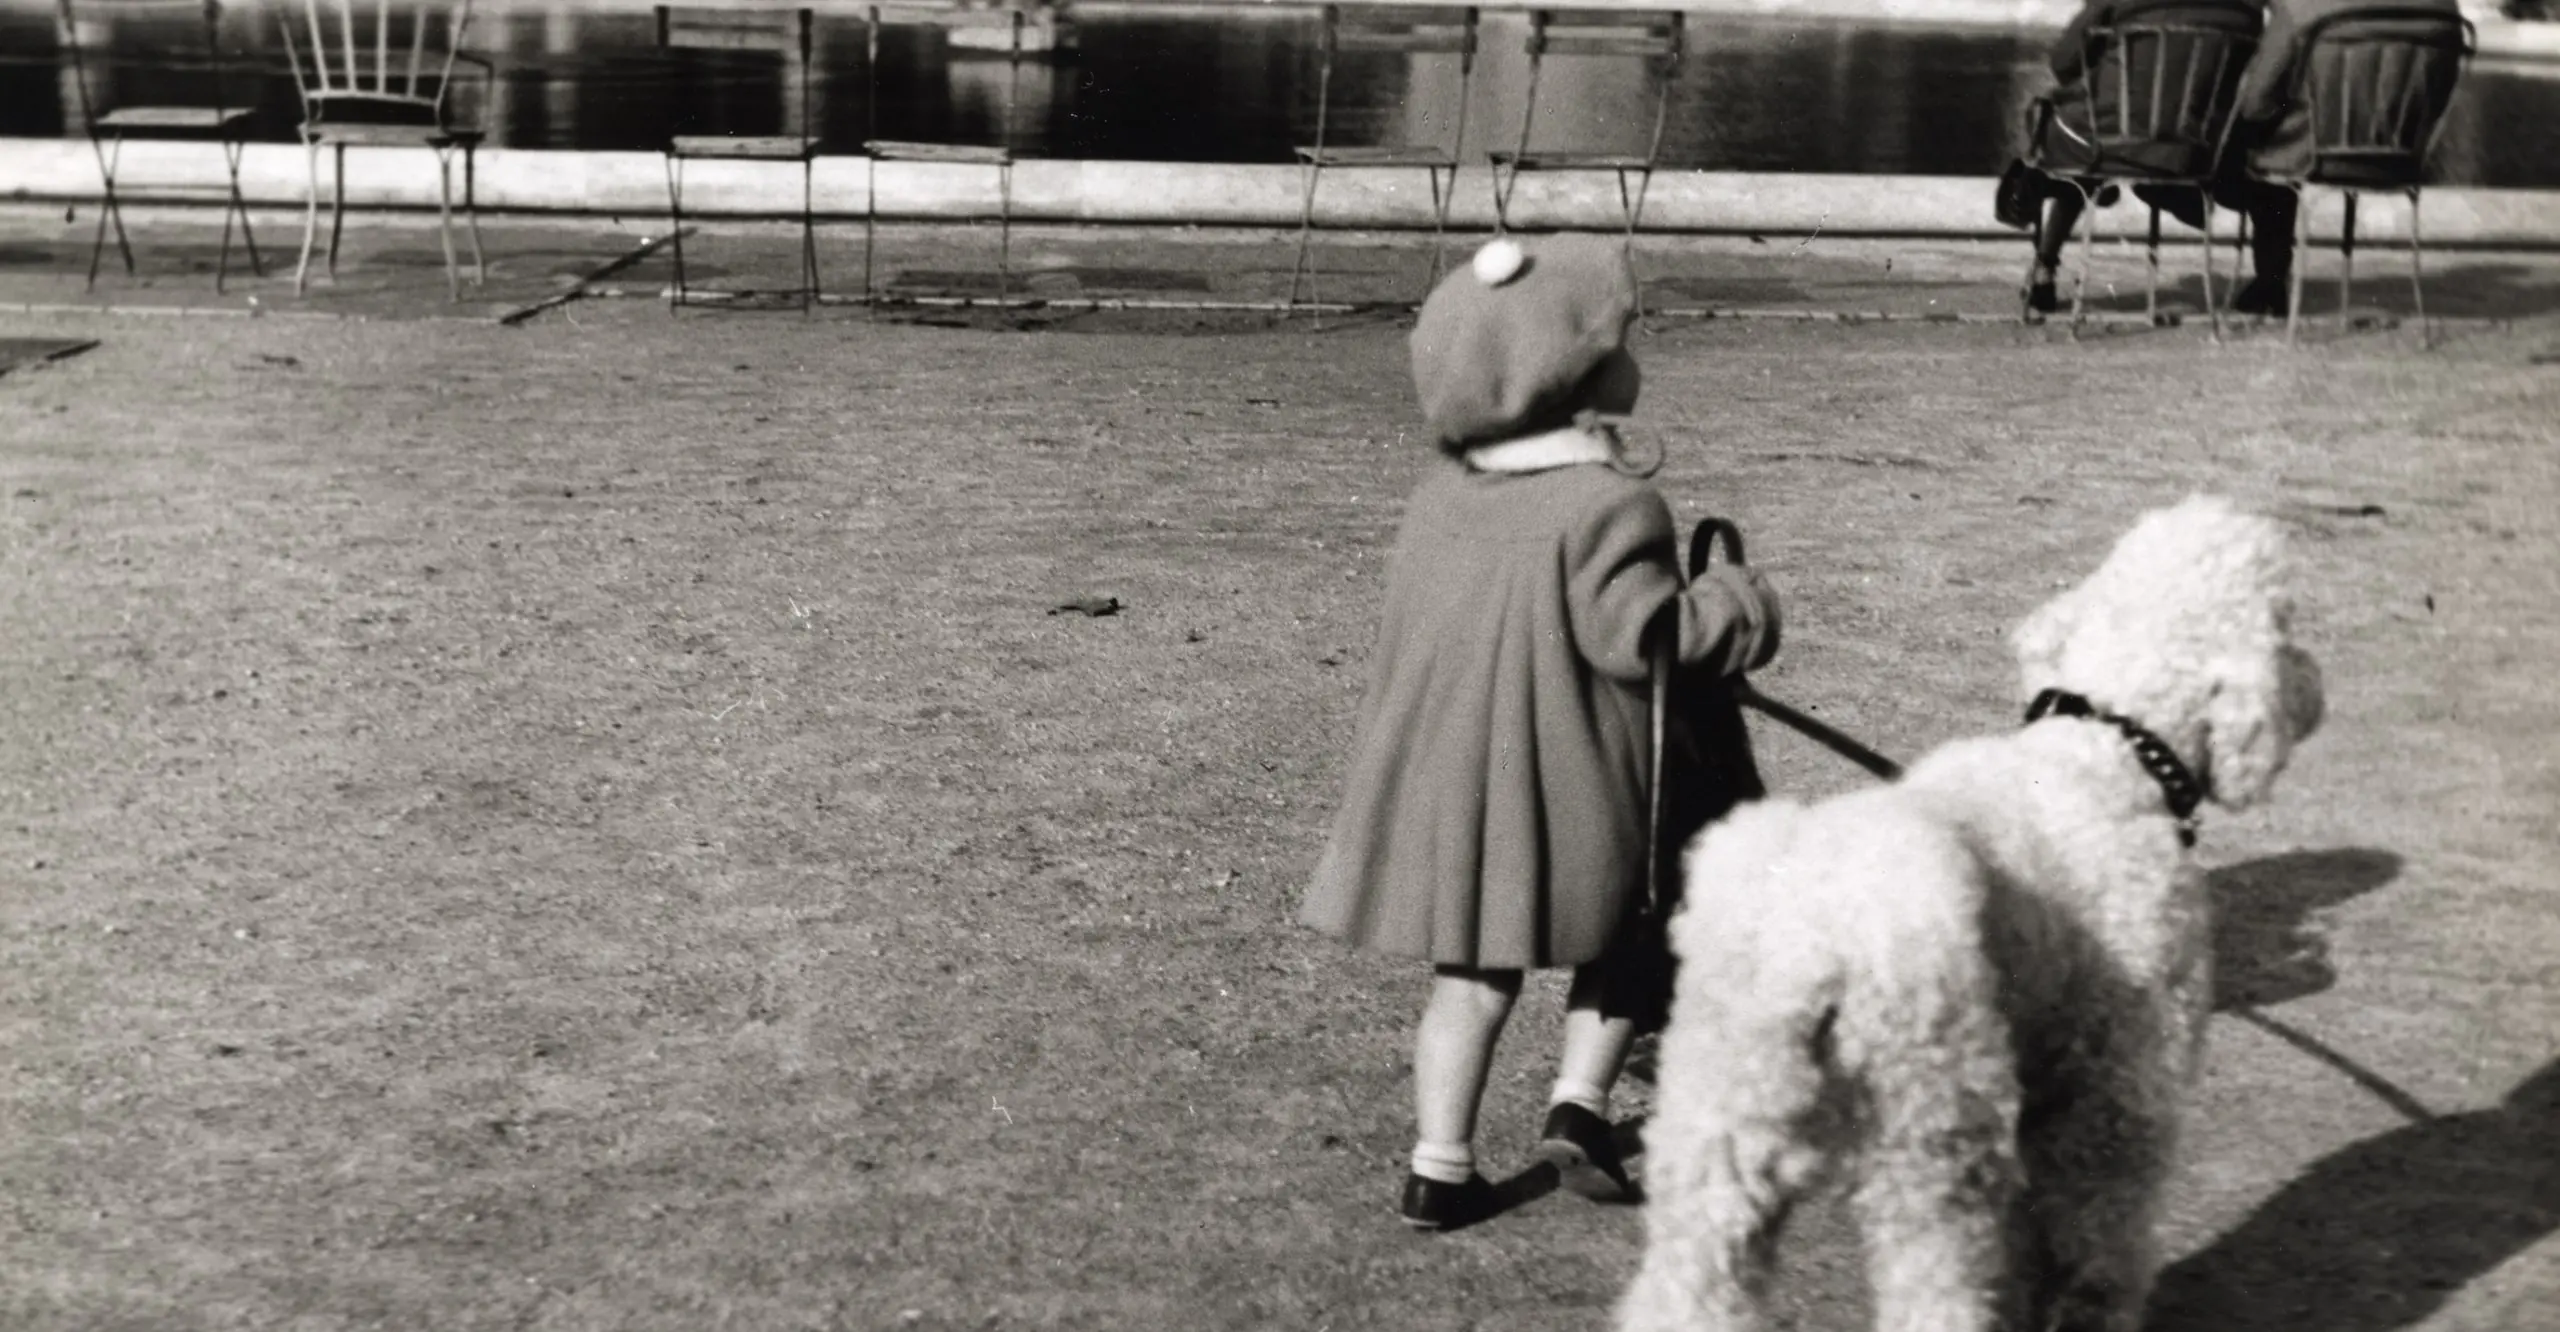 Black and white photograph of a young person holding a dog on a lead in a Paris park